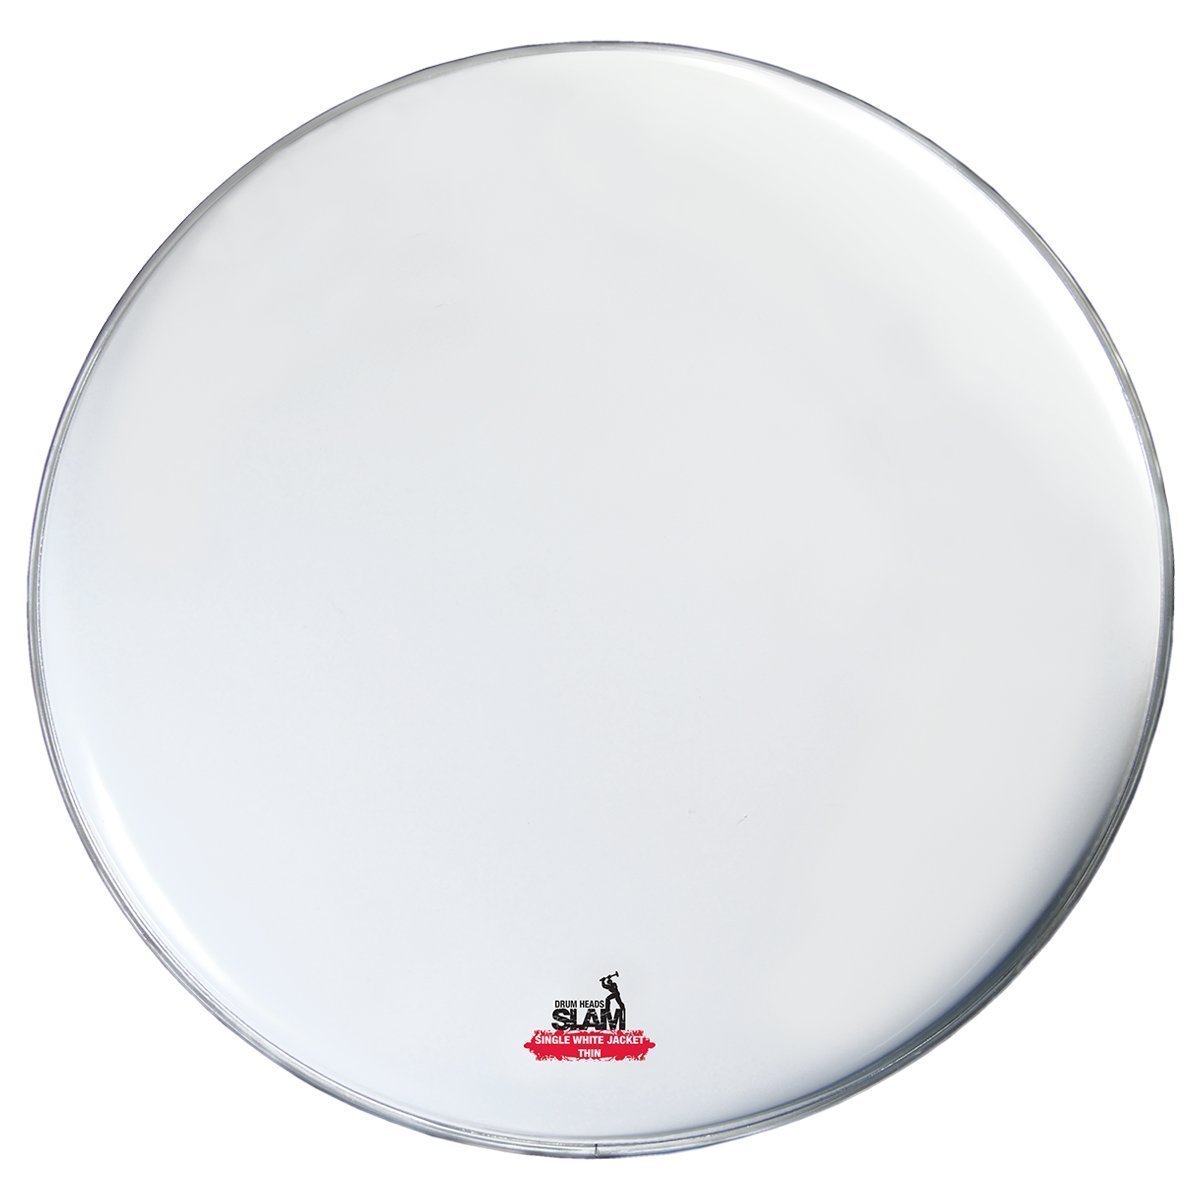 Slam Single Ply Smooth Coated Thin Weight Drum Head (22")